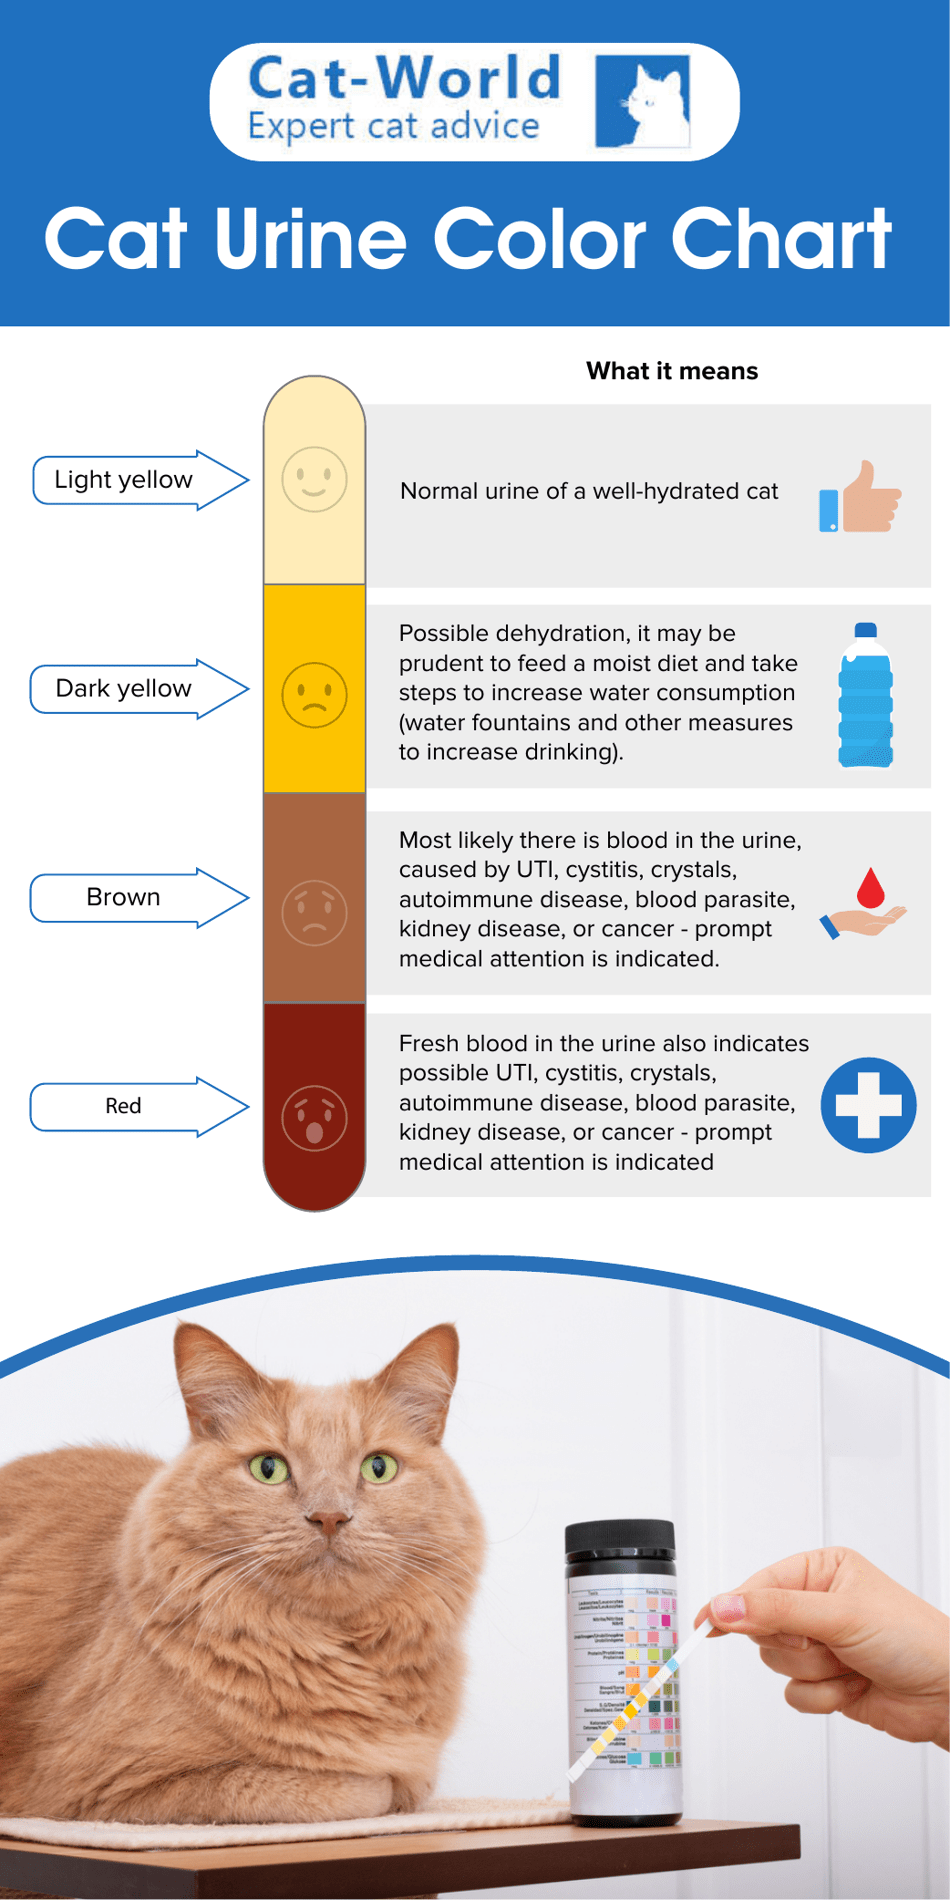 Cat Urine Color Chart - Cat World, Page 1